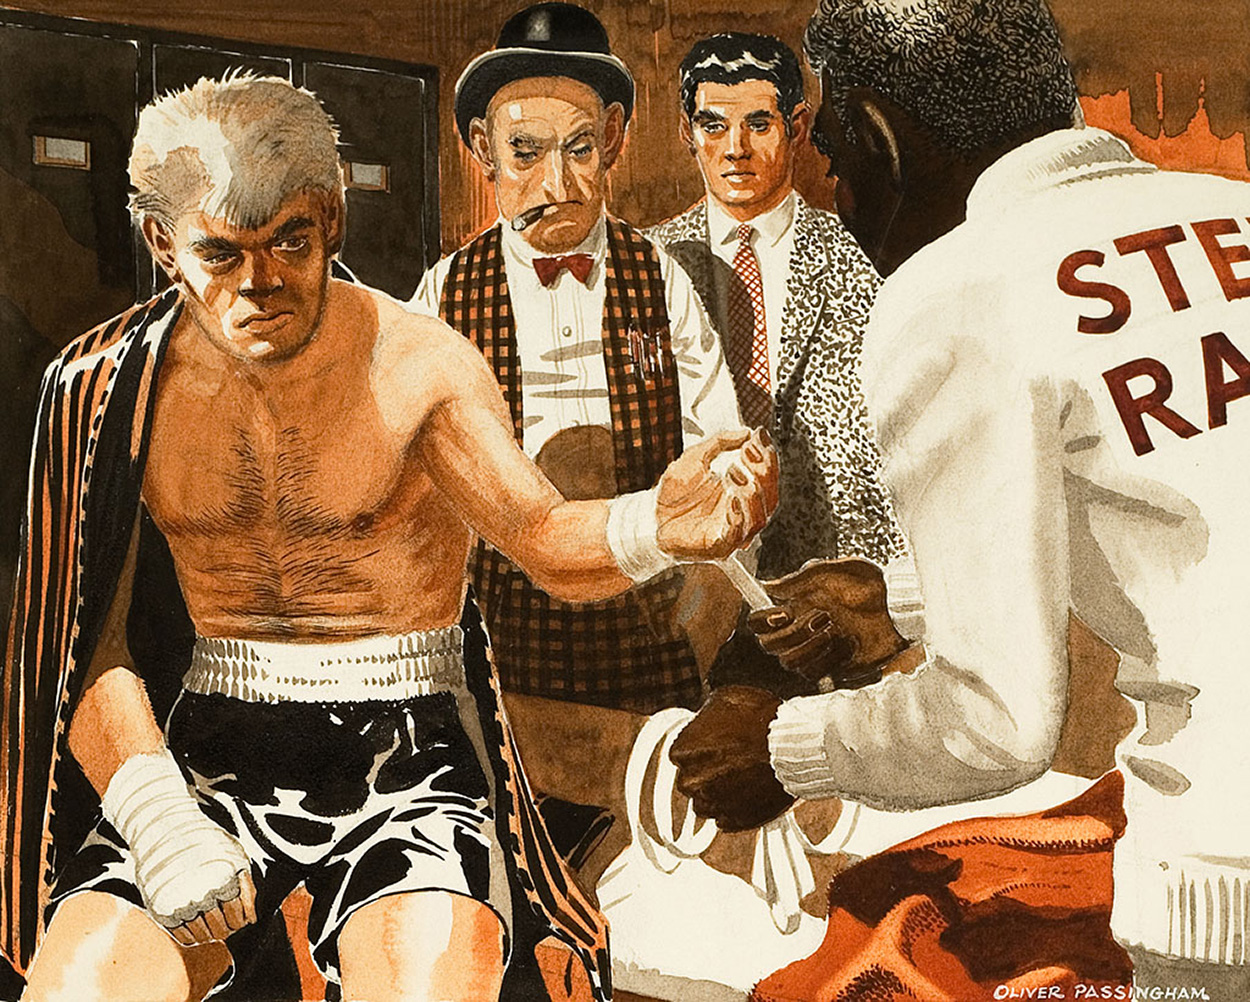 The Boxer After The Fight (Original) (Signed) art by Oliver Passingham Art at The Illustration Art Gallery